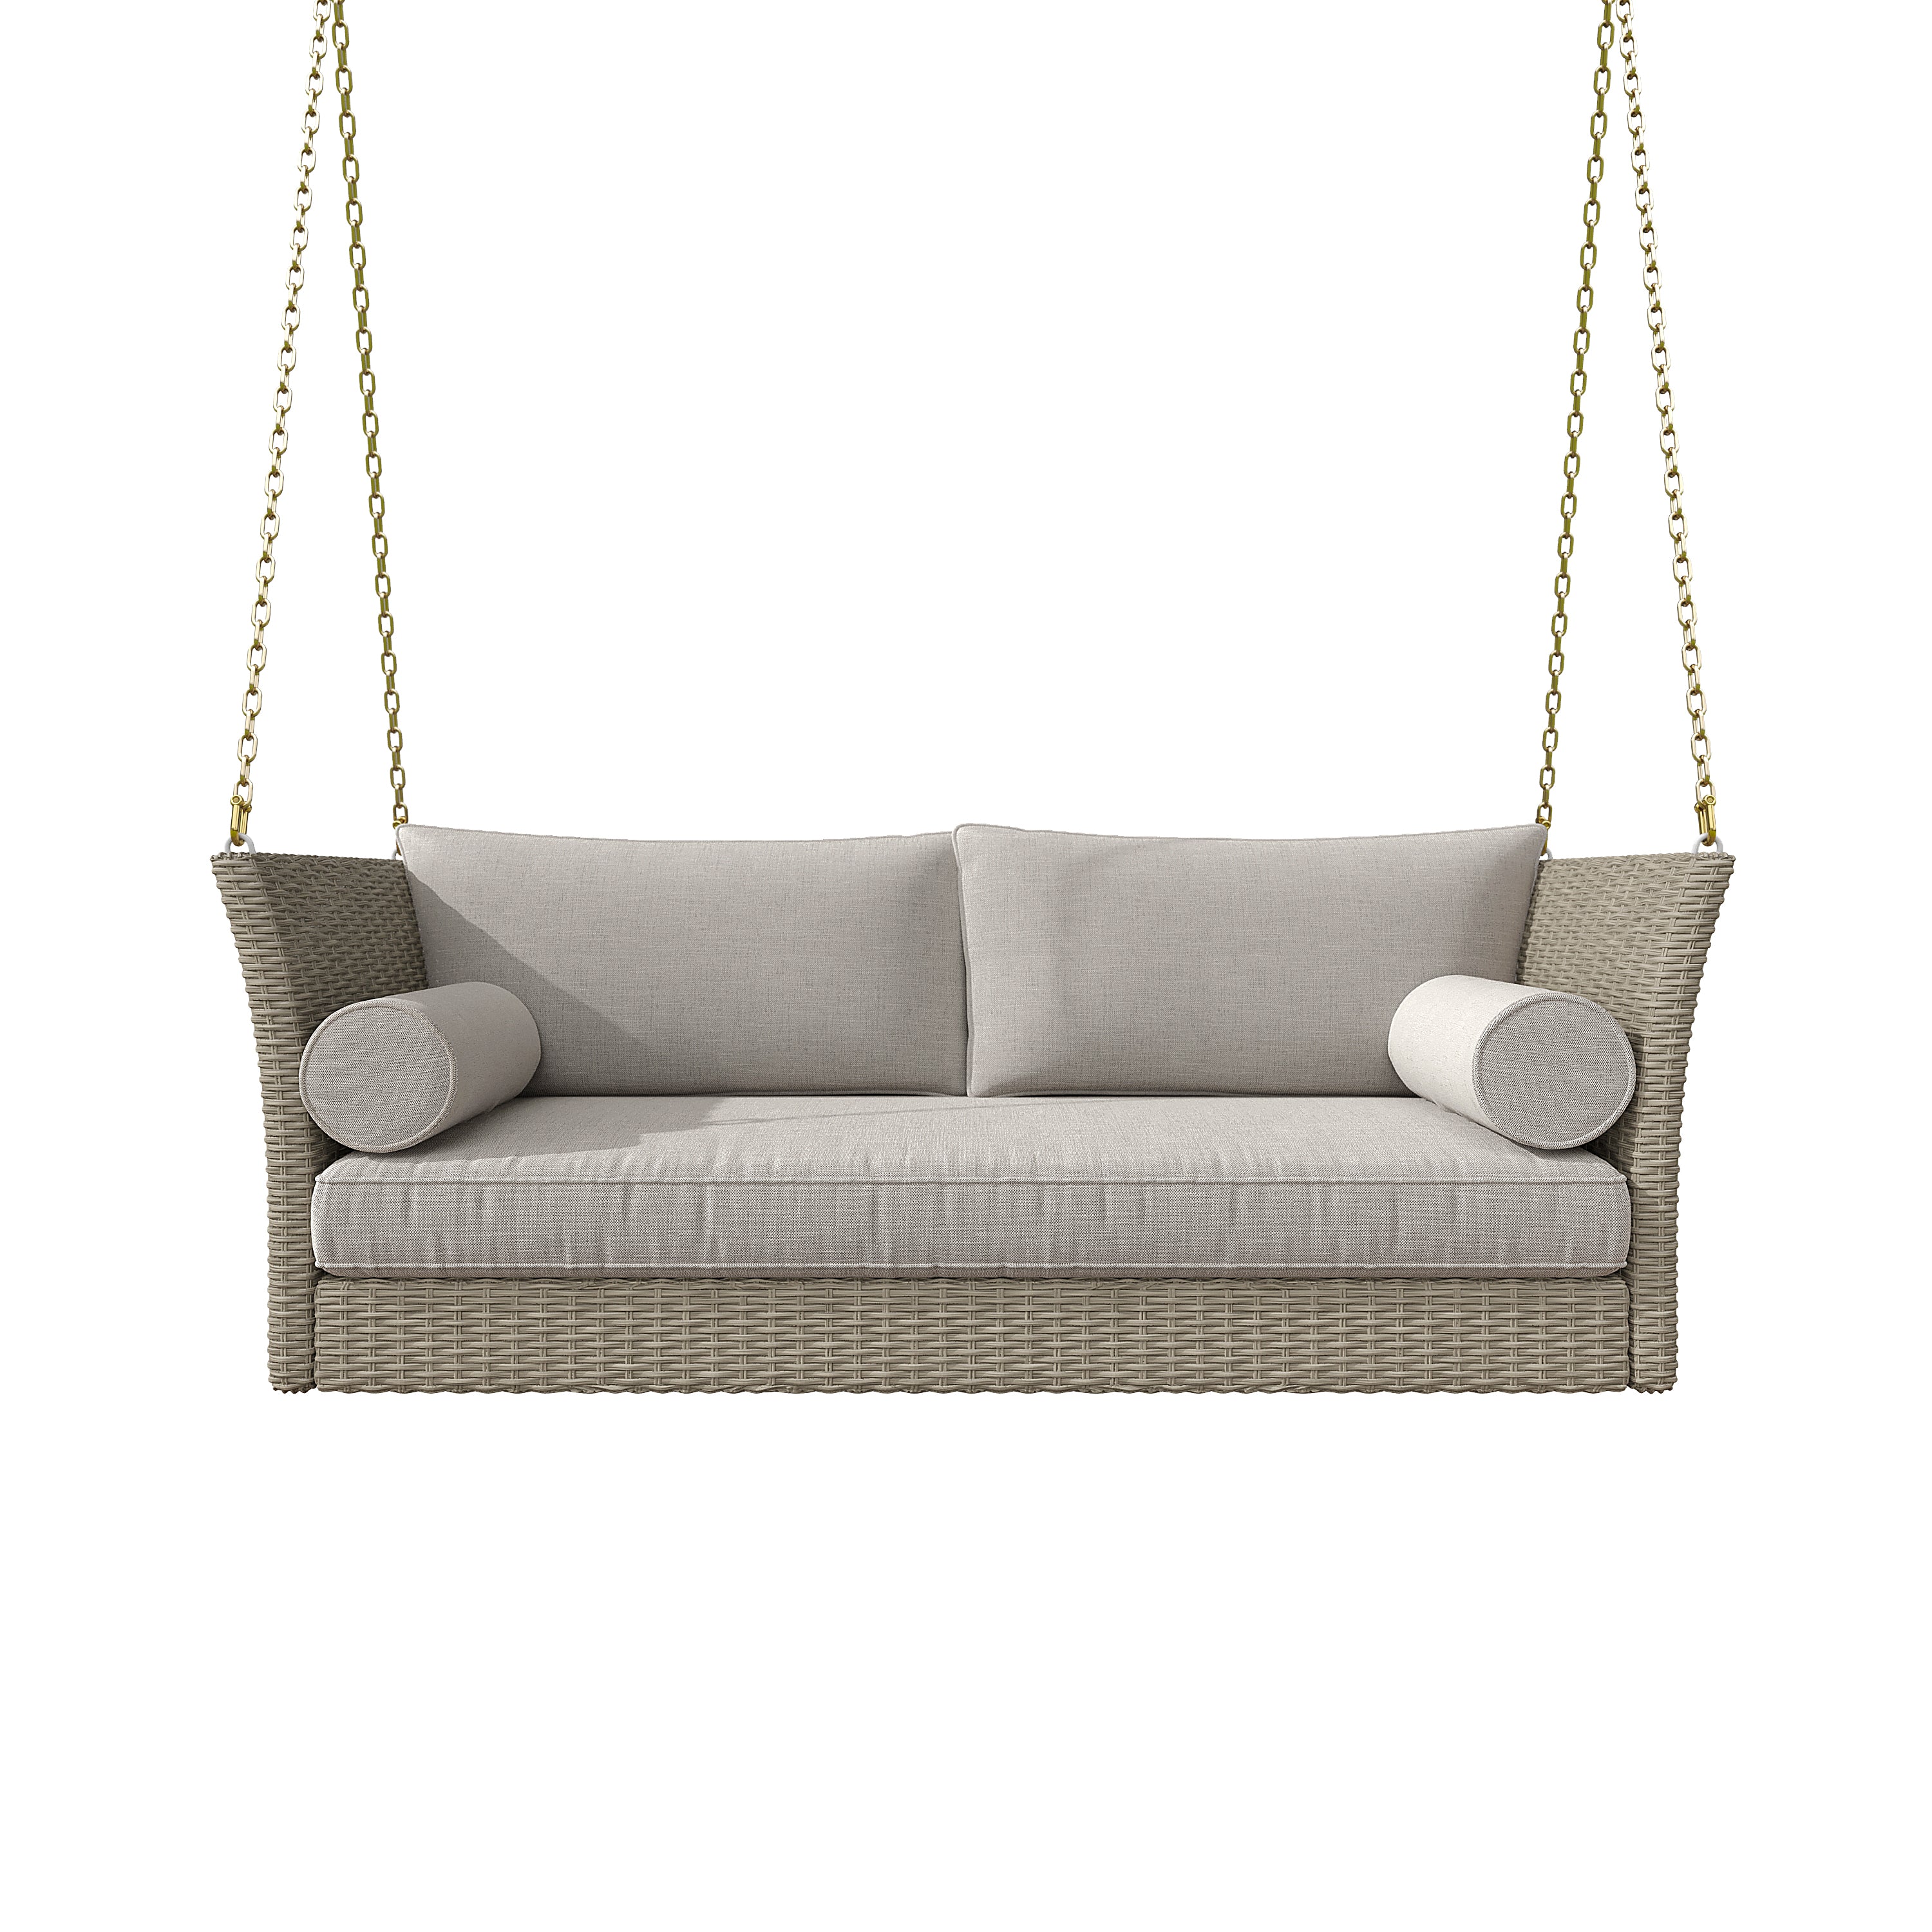 Sonoma Wicker Daybed Porch Swing With Cushions